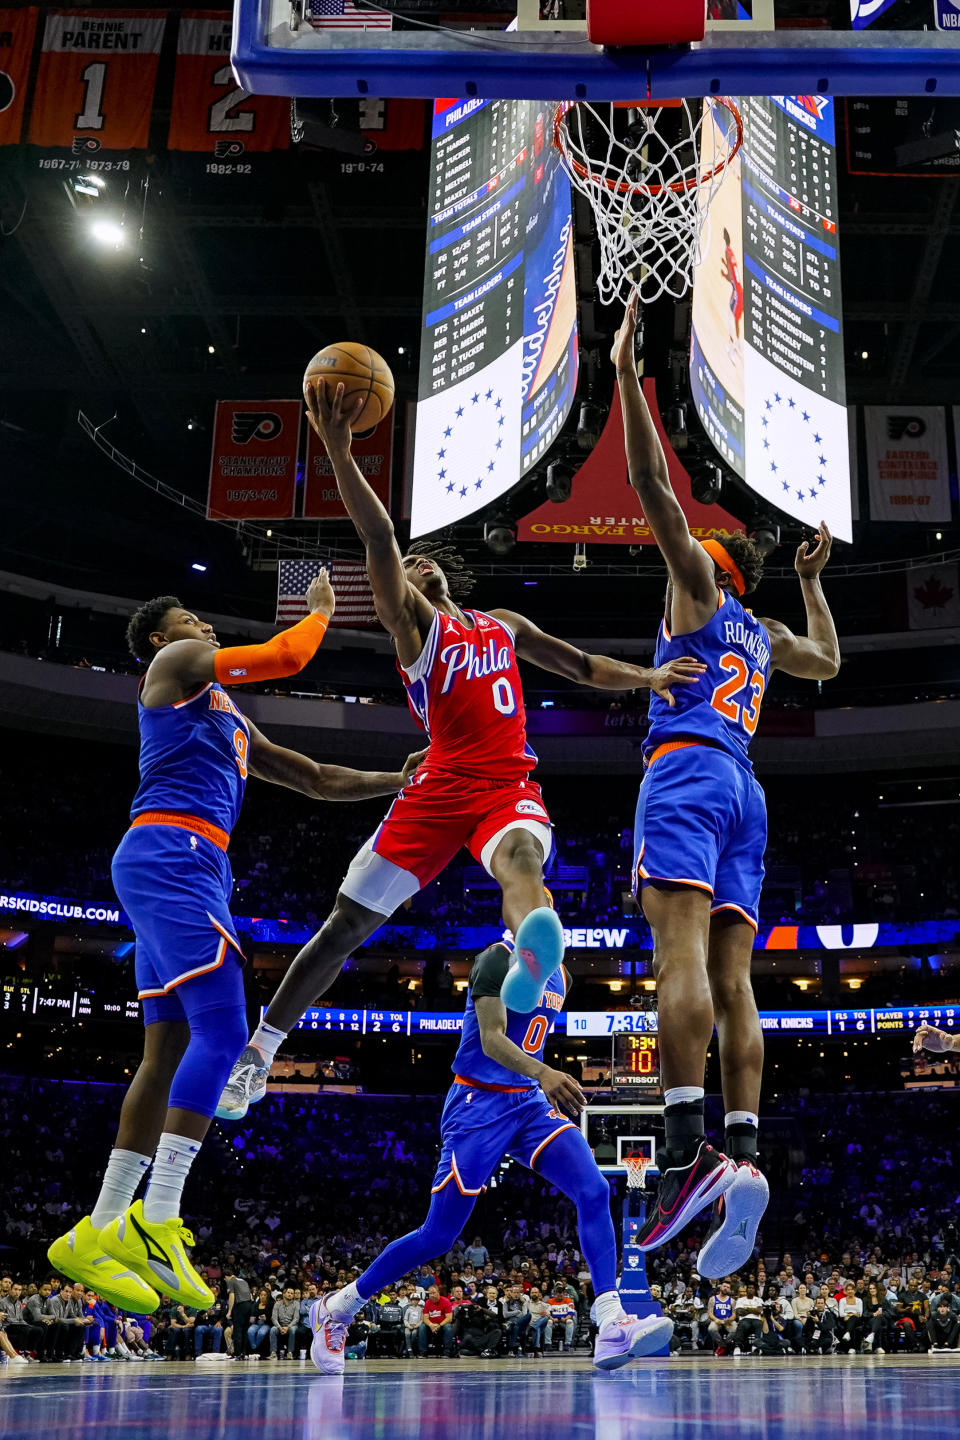 Philadelphia 76ers' Tyrese Maxey, center, shoots against New York Knicks' Mitchell Robinson, right, and R.J. Barrett, left, during the first half of an NBA basketball game Friday, Nov. 4, 2022, in Philadelphia. (AP Photo/Chris Szagola)